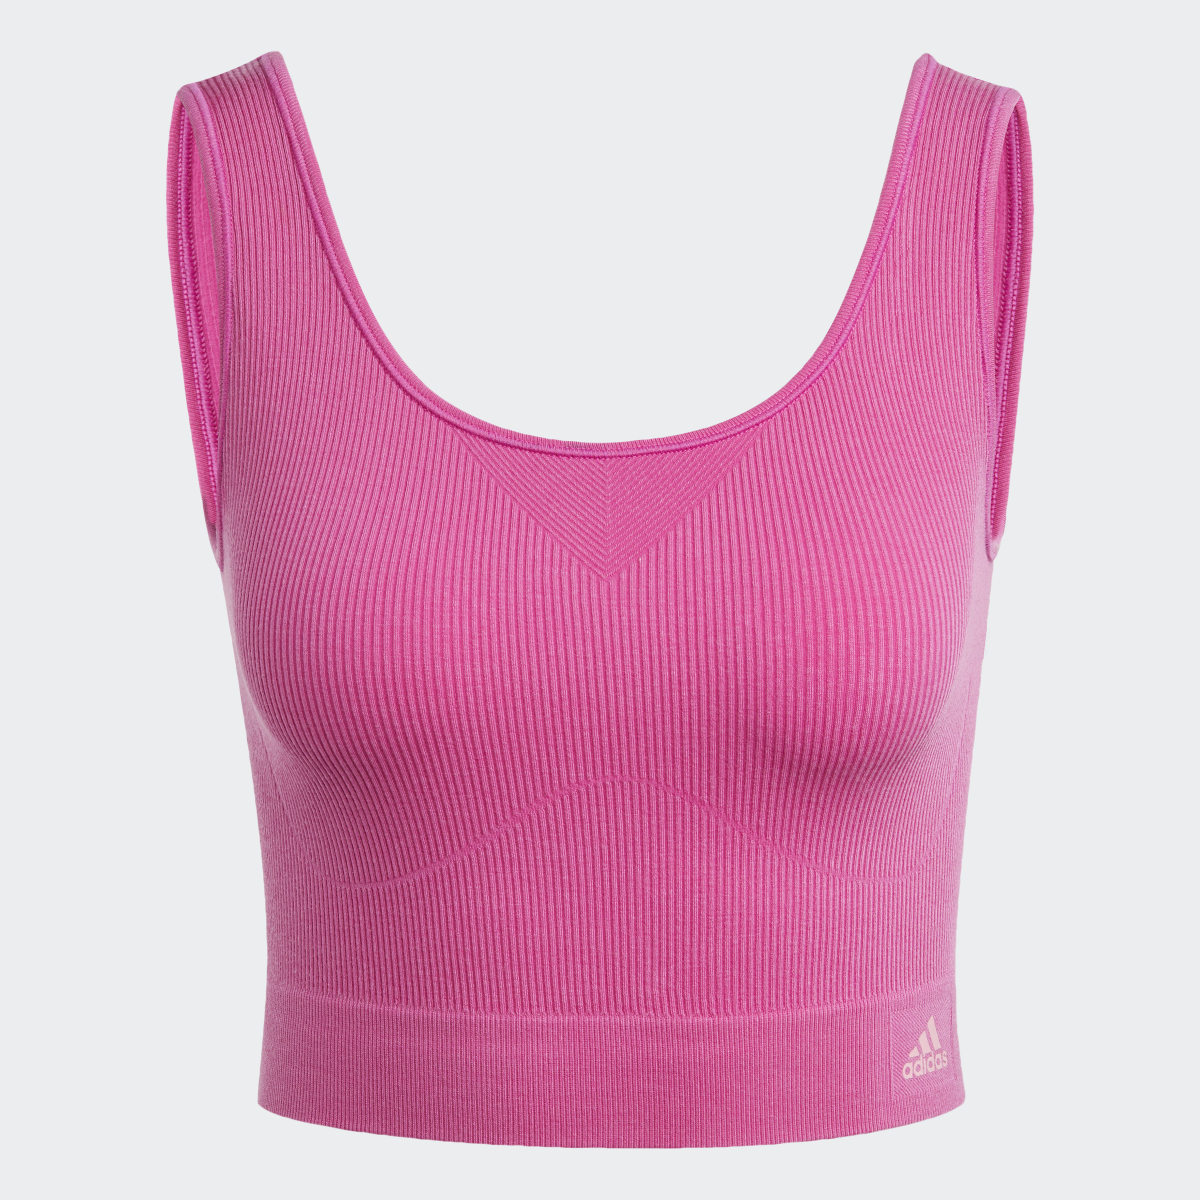 Adidas Ribbed Active Seamless Cropped Tank Top Underwear. 5